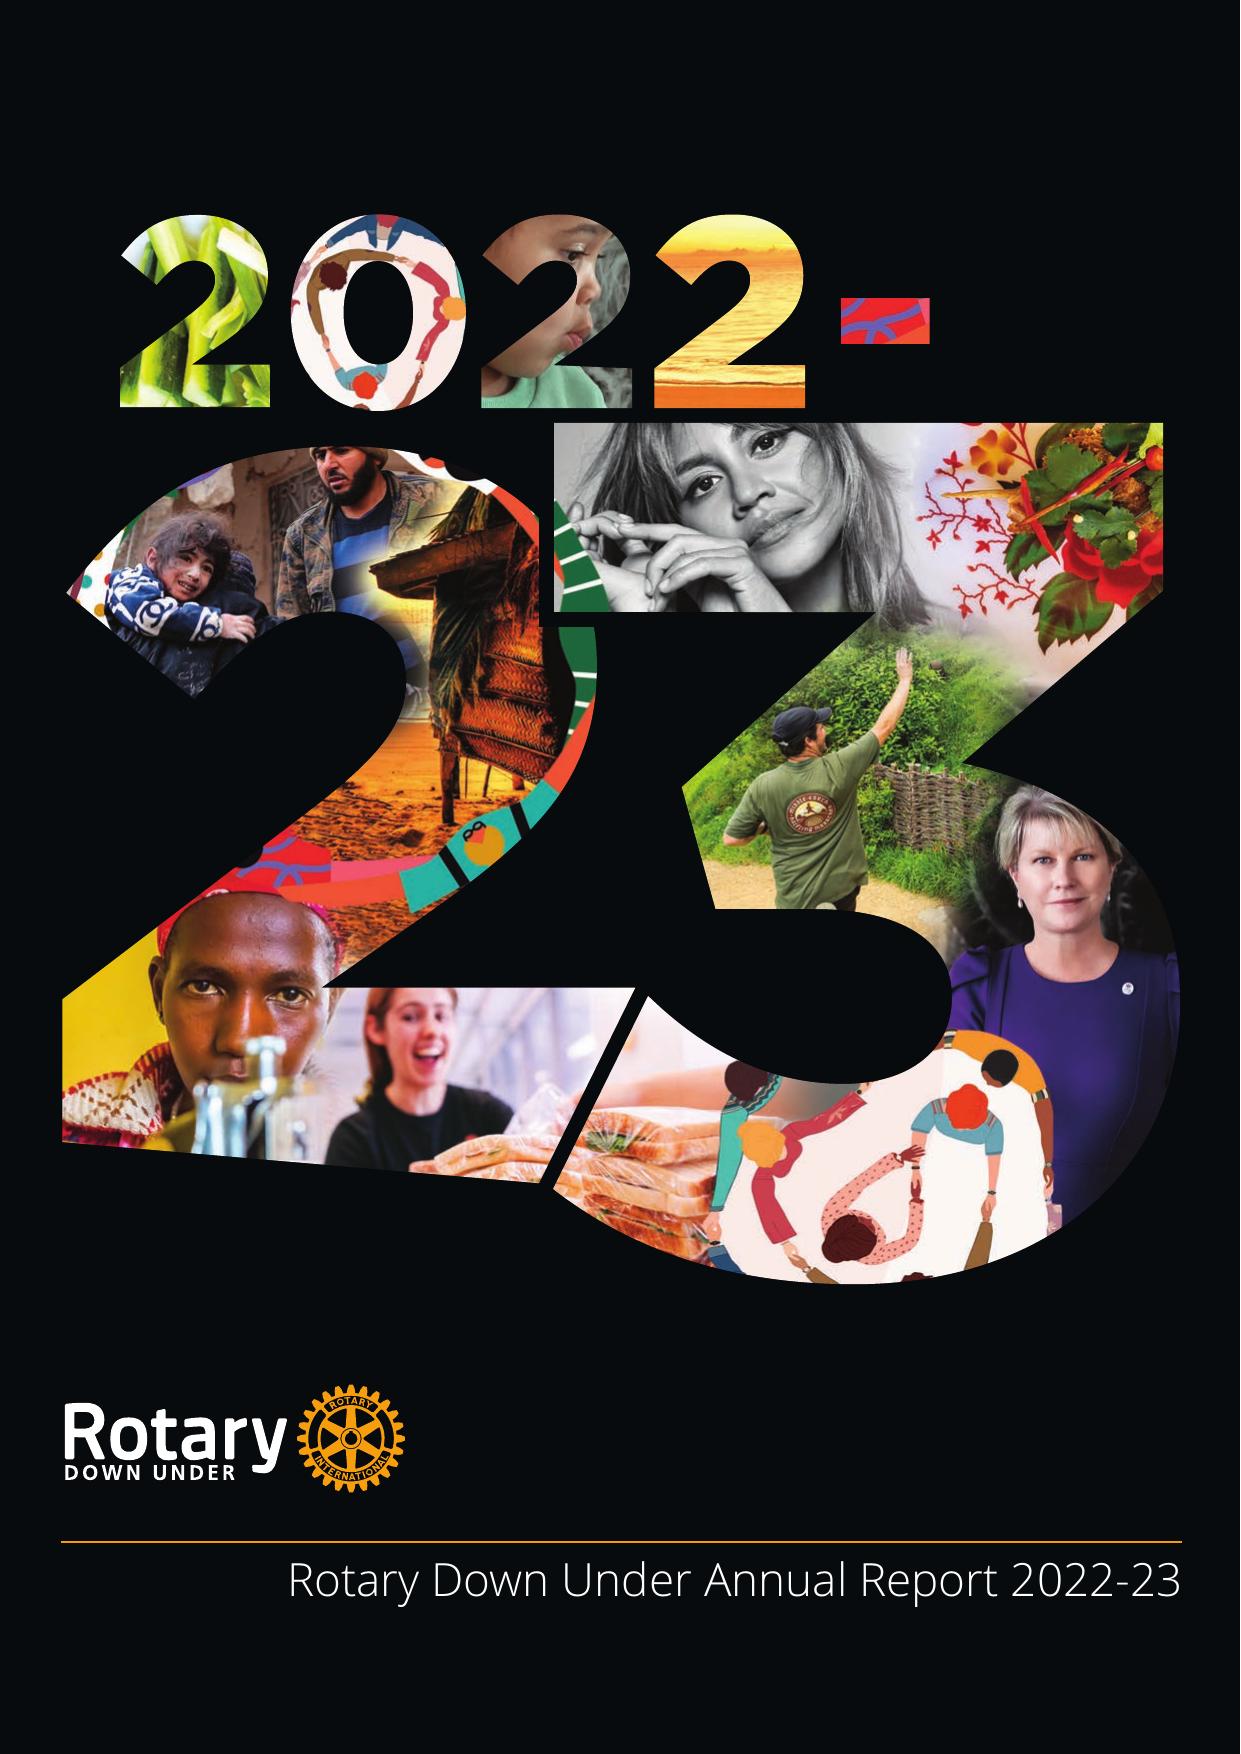 ROTARYDOWNUNDER 2023 Annual Report